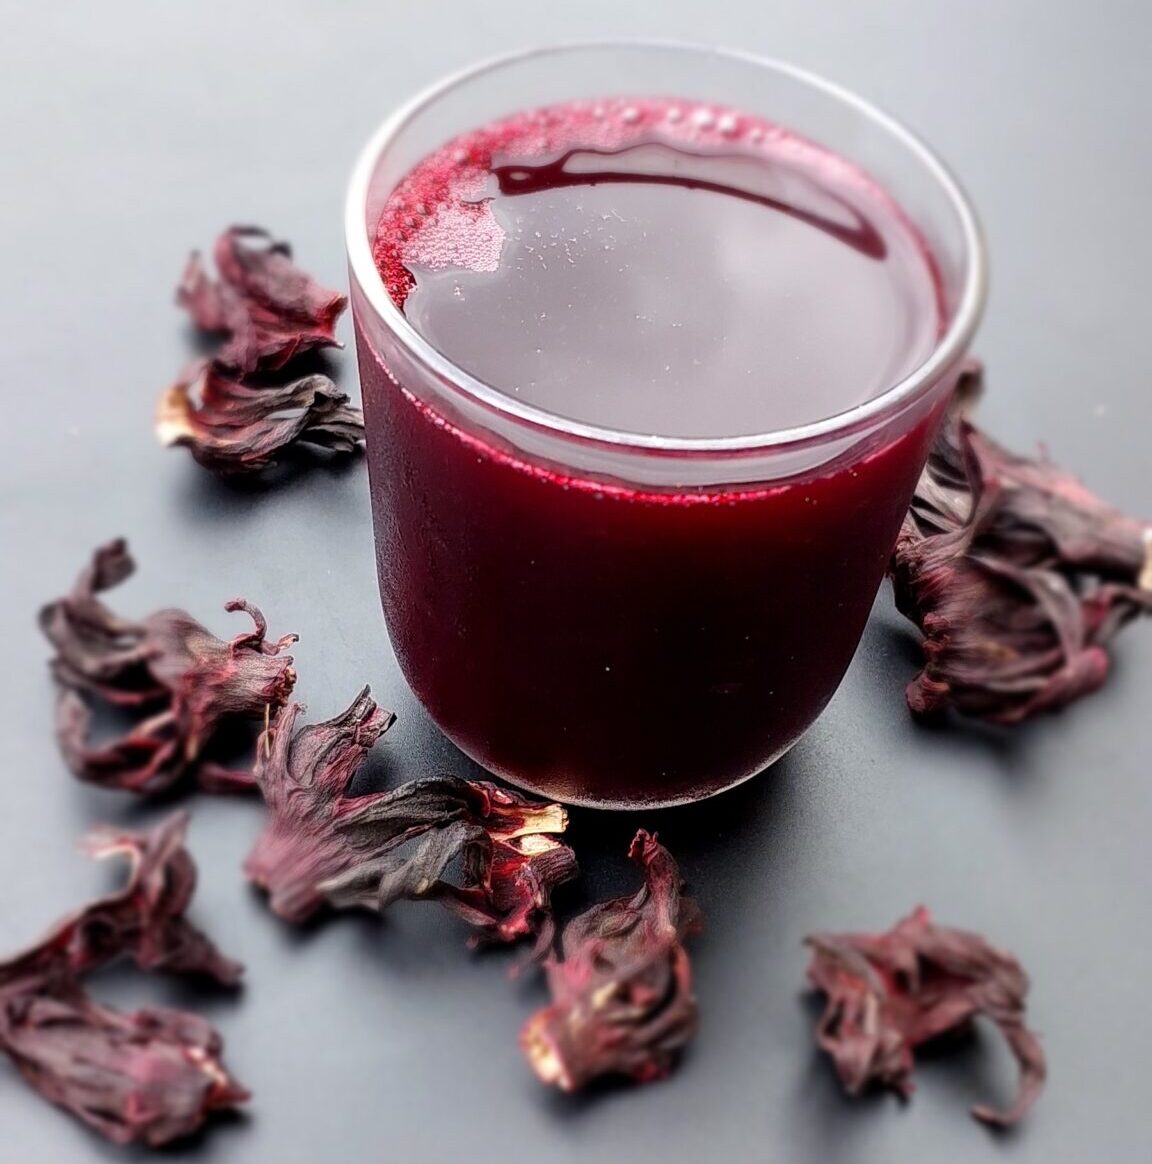 #NaijaFarmerTips

Agriculture is self sufficient, healing and provides everything you need to leave a great life.

One of the best drinks the universe gave to humans Hibiscus 🌺 leaves drink popularly called Zobo.

Rather than take carbonated drinks that cause more harm than